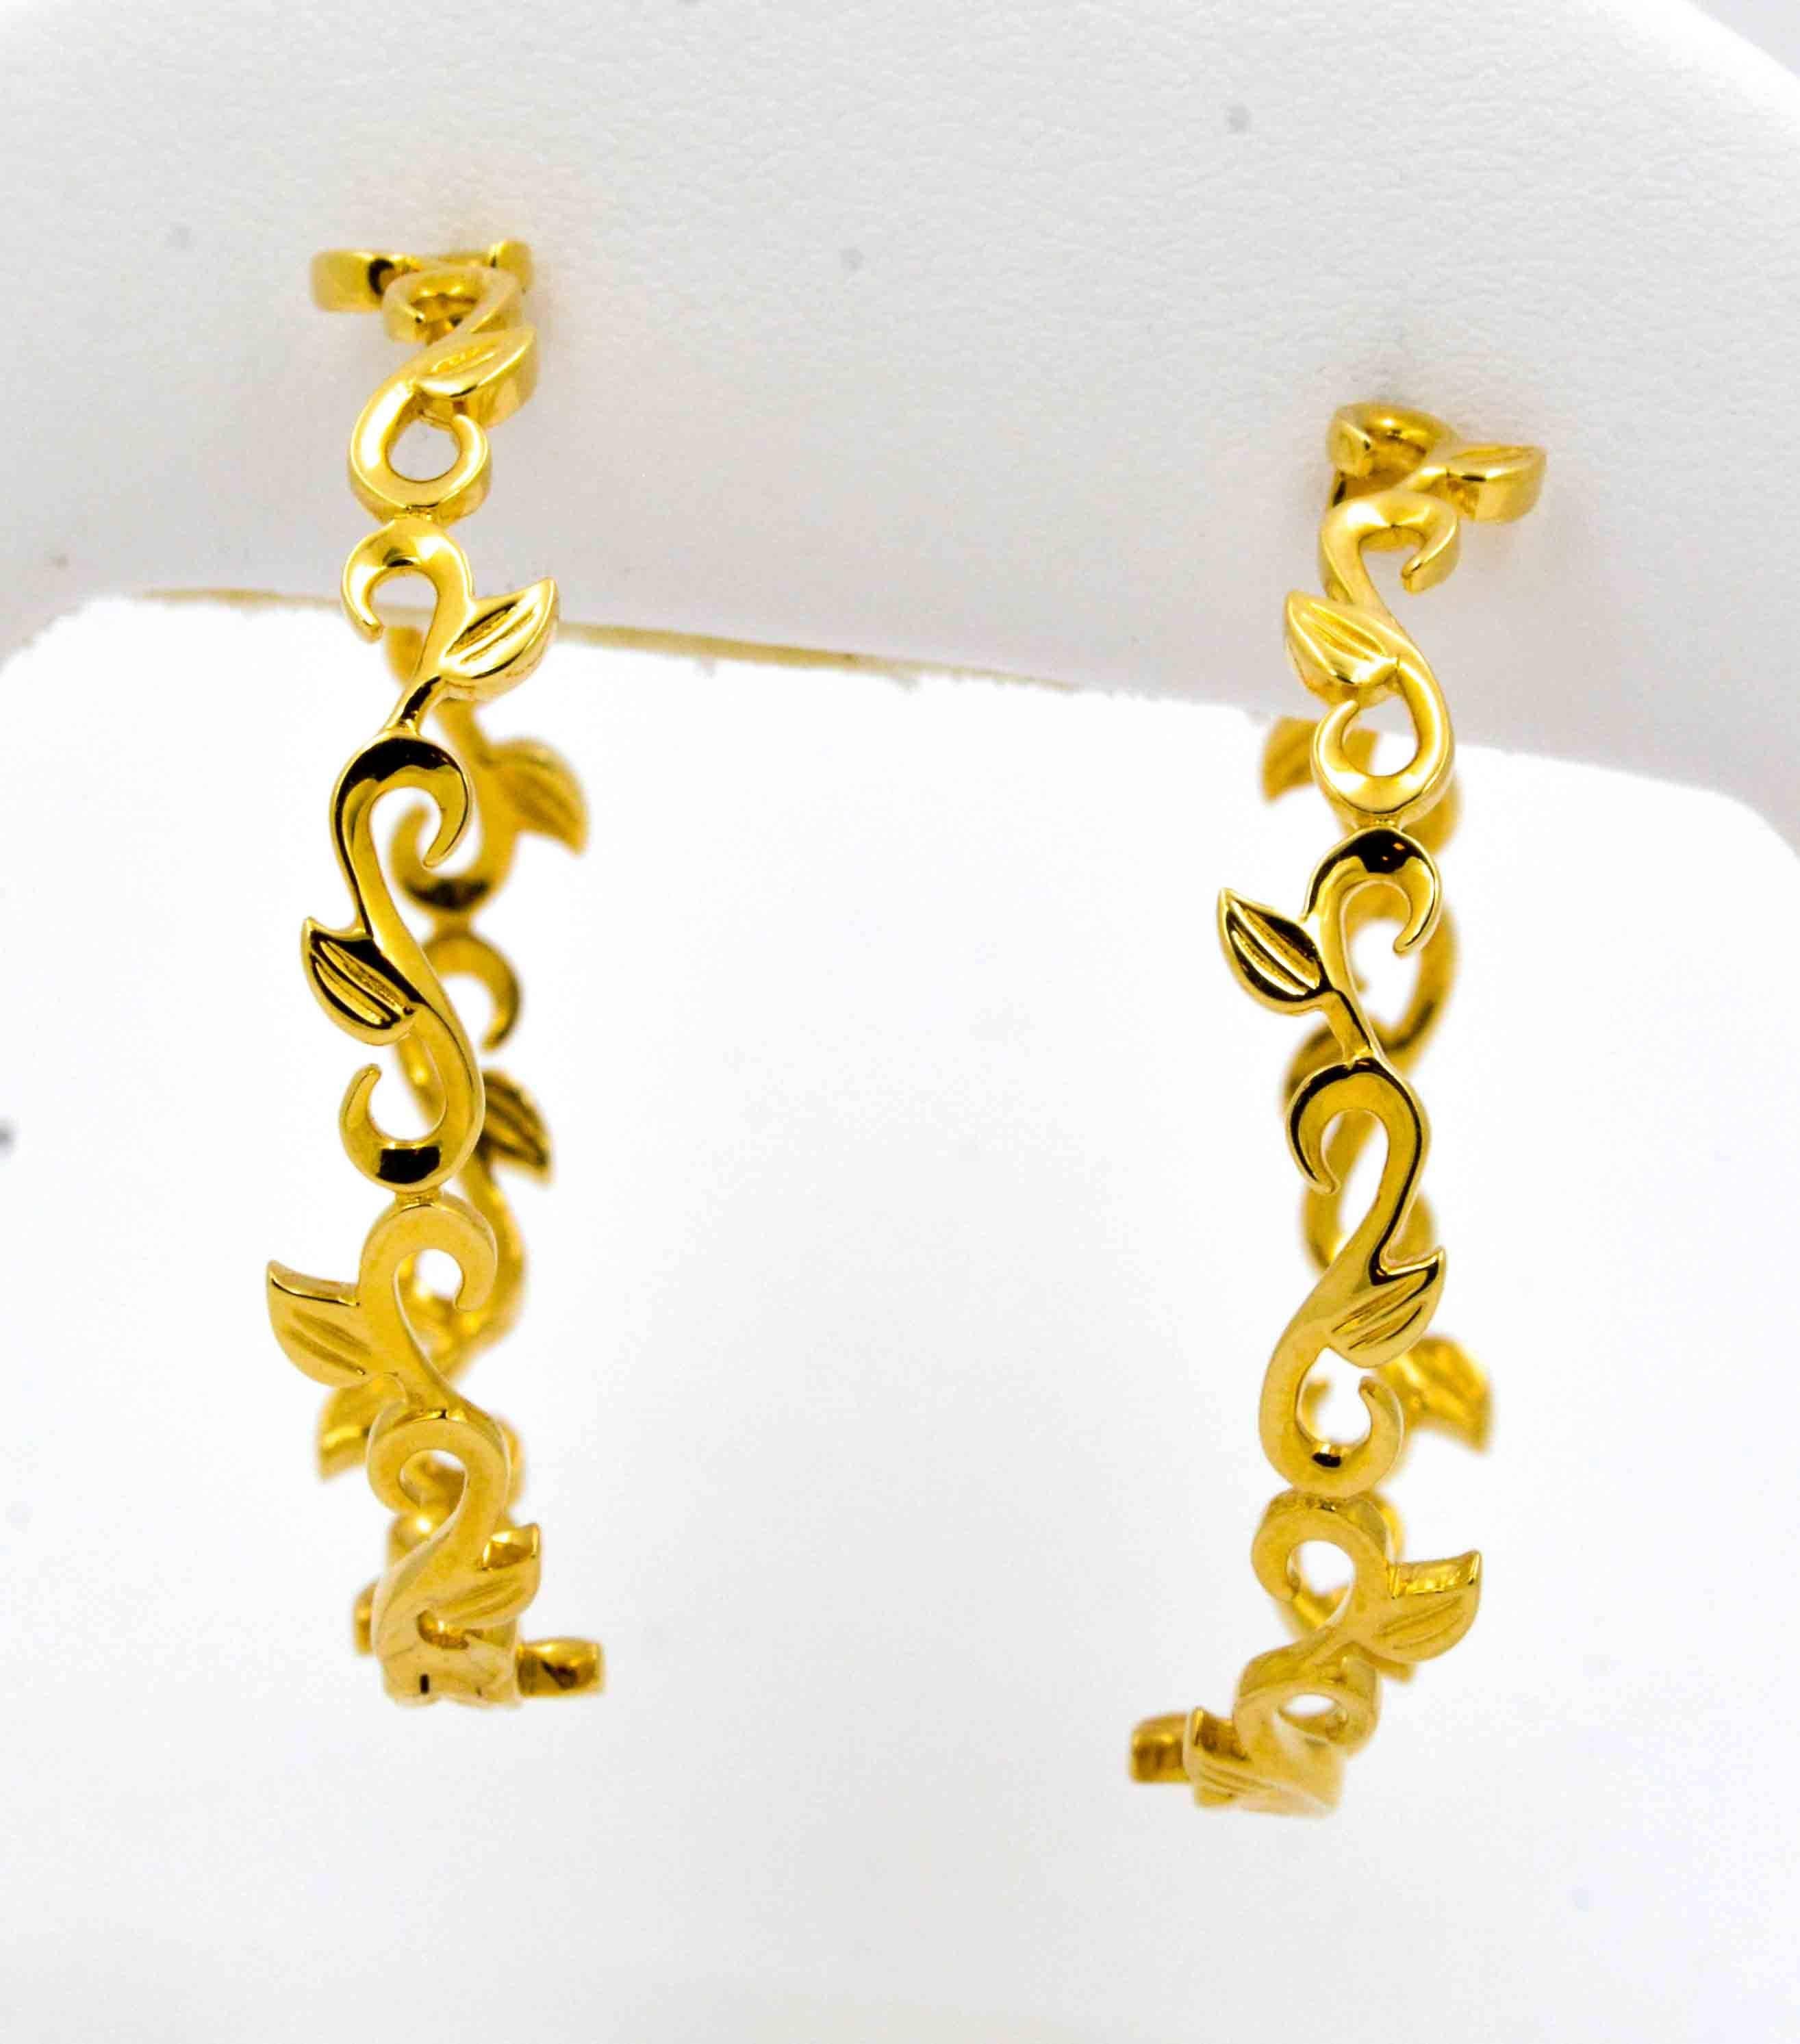 These whimsical Katie Decker gold hoop earrings are crafted in 18kt yellow gold in a flowing ivy style scroll all the way around the earrings.  These gold hoops are 39 mm in diameter which makes these earrings noticeably large, but due to the open